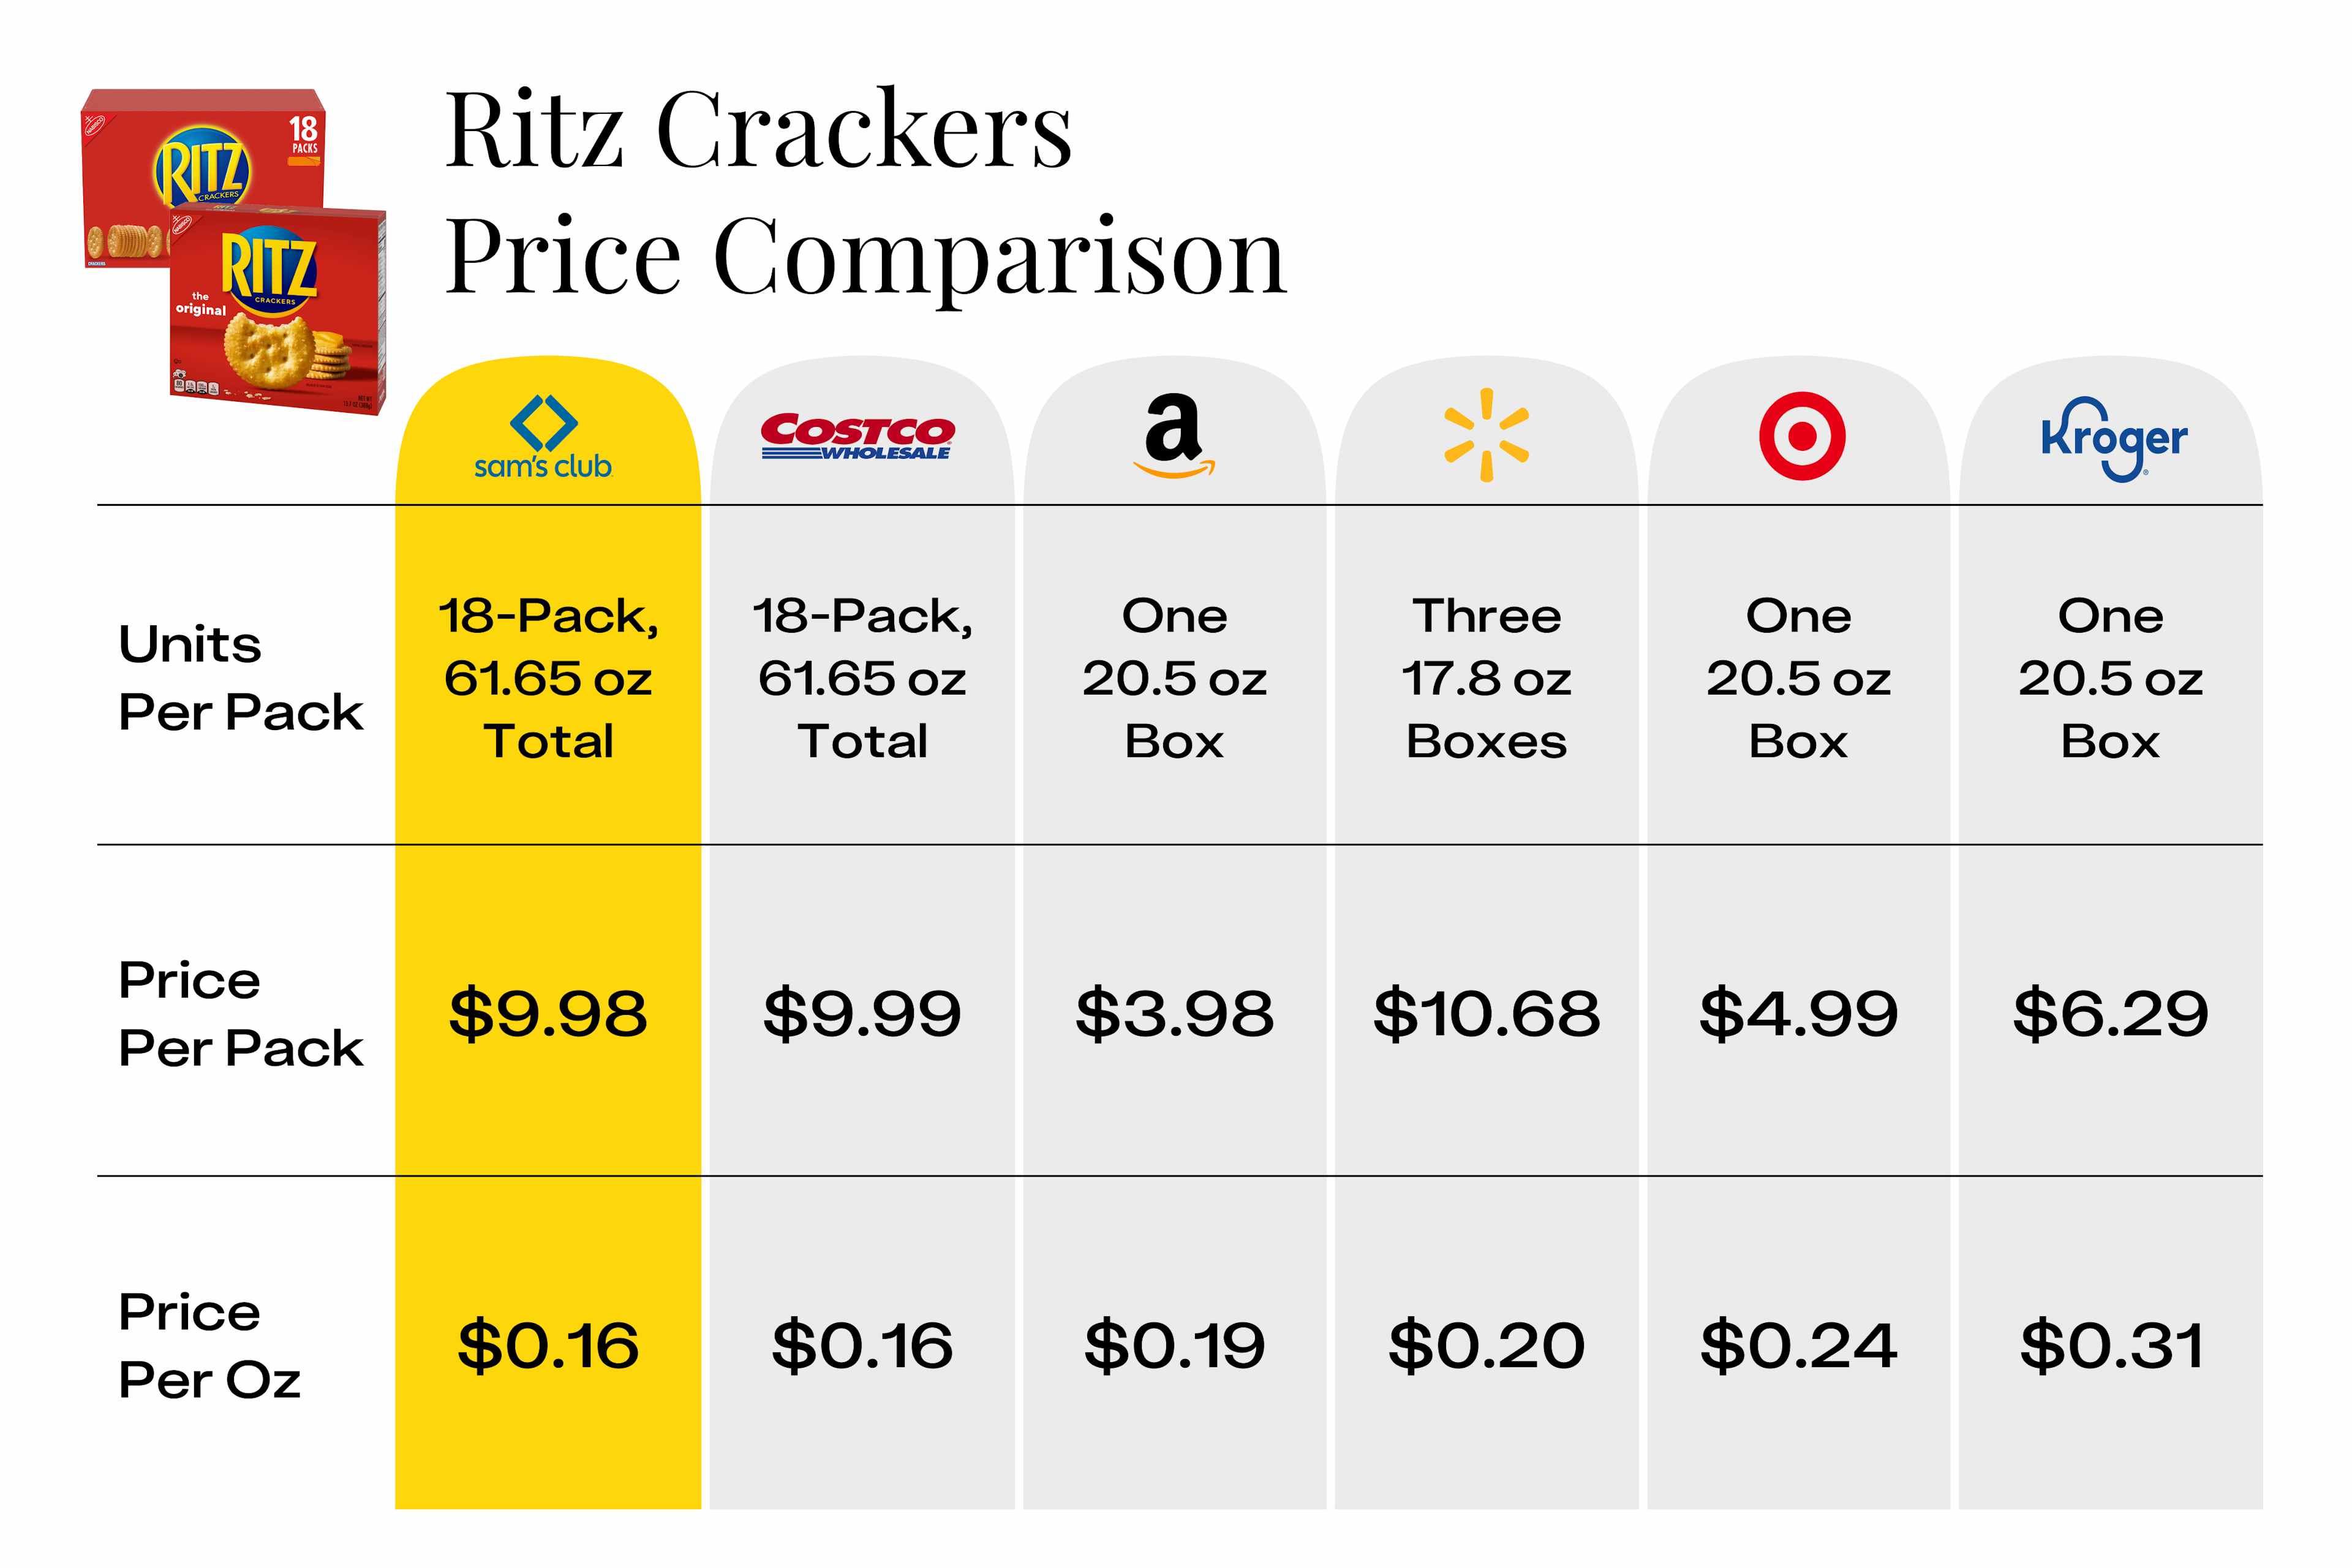 The price of Ritz crackers per ounce compared at six different stores, including Sam's Club.